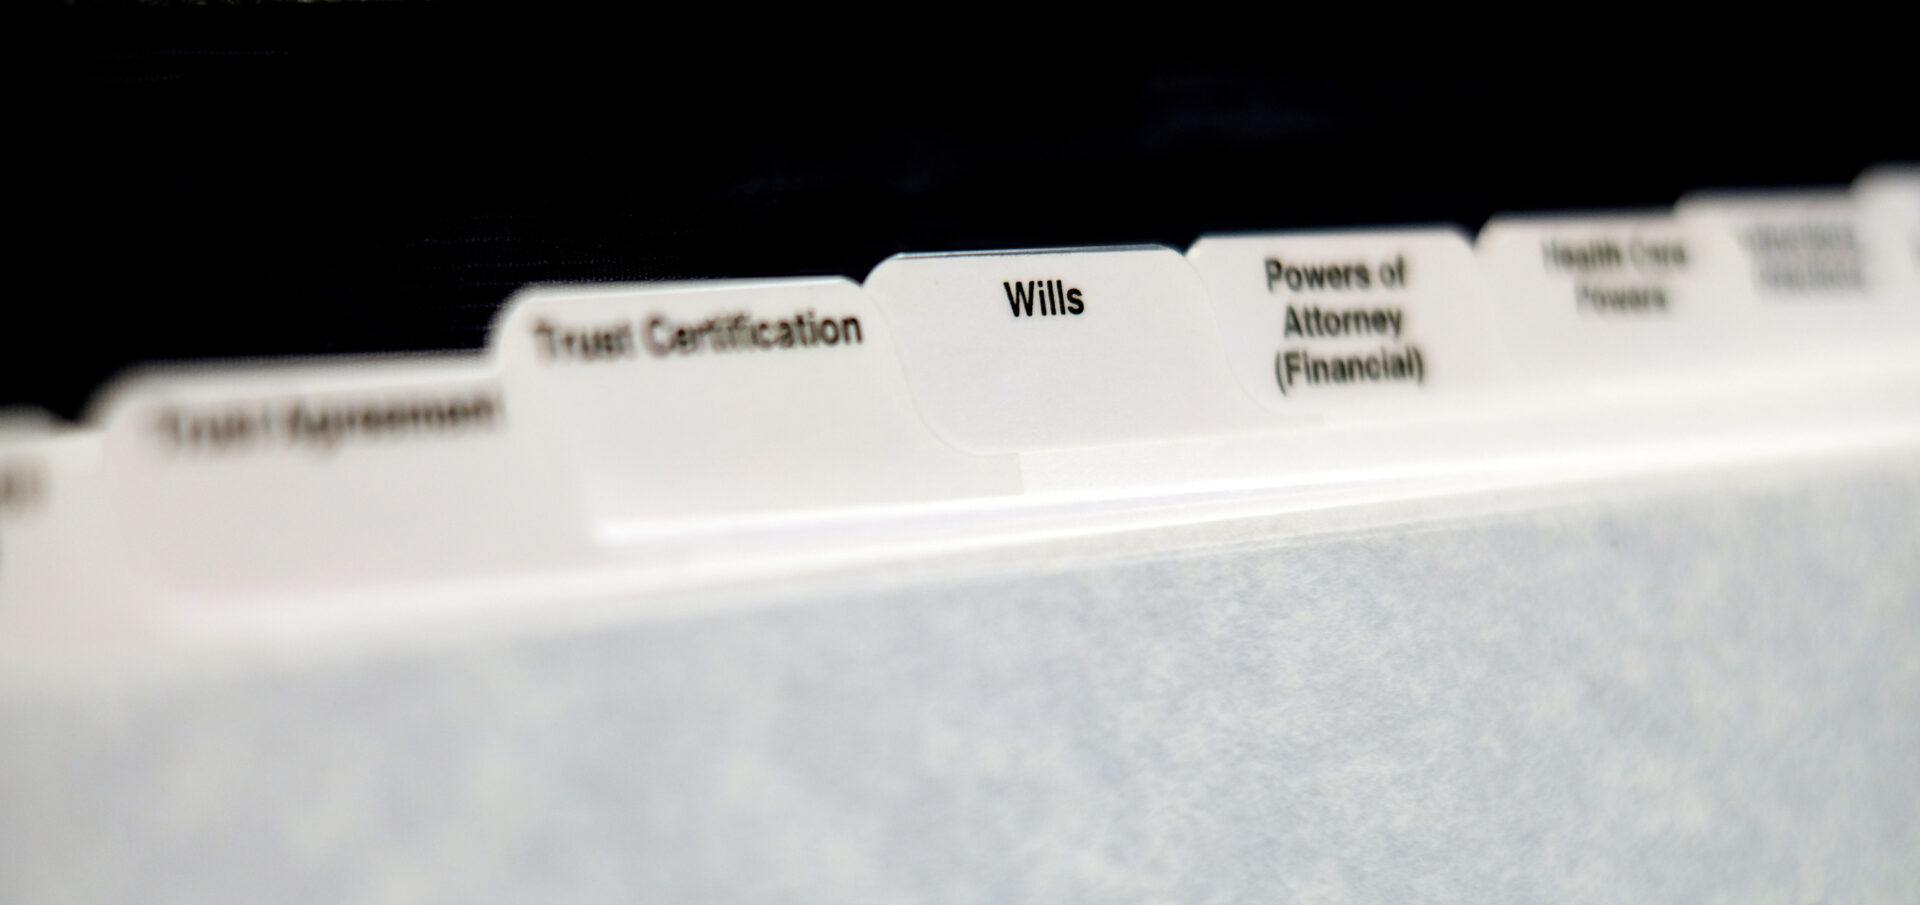 Estate planning documents organized with tabs for Will Power of Attorney and Trust